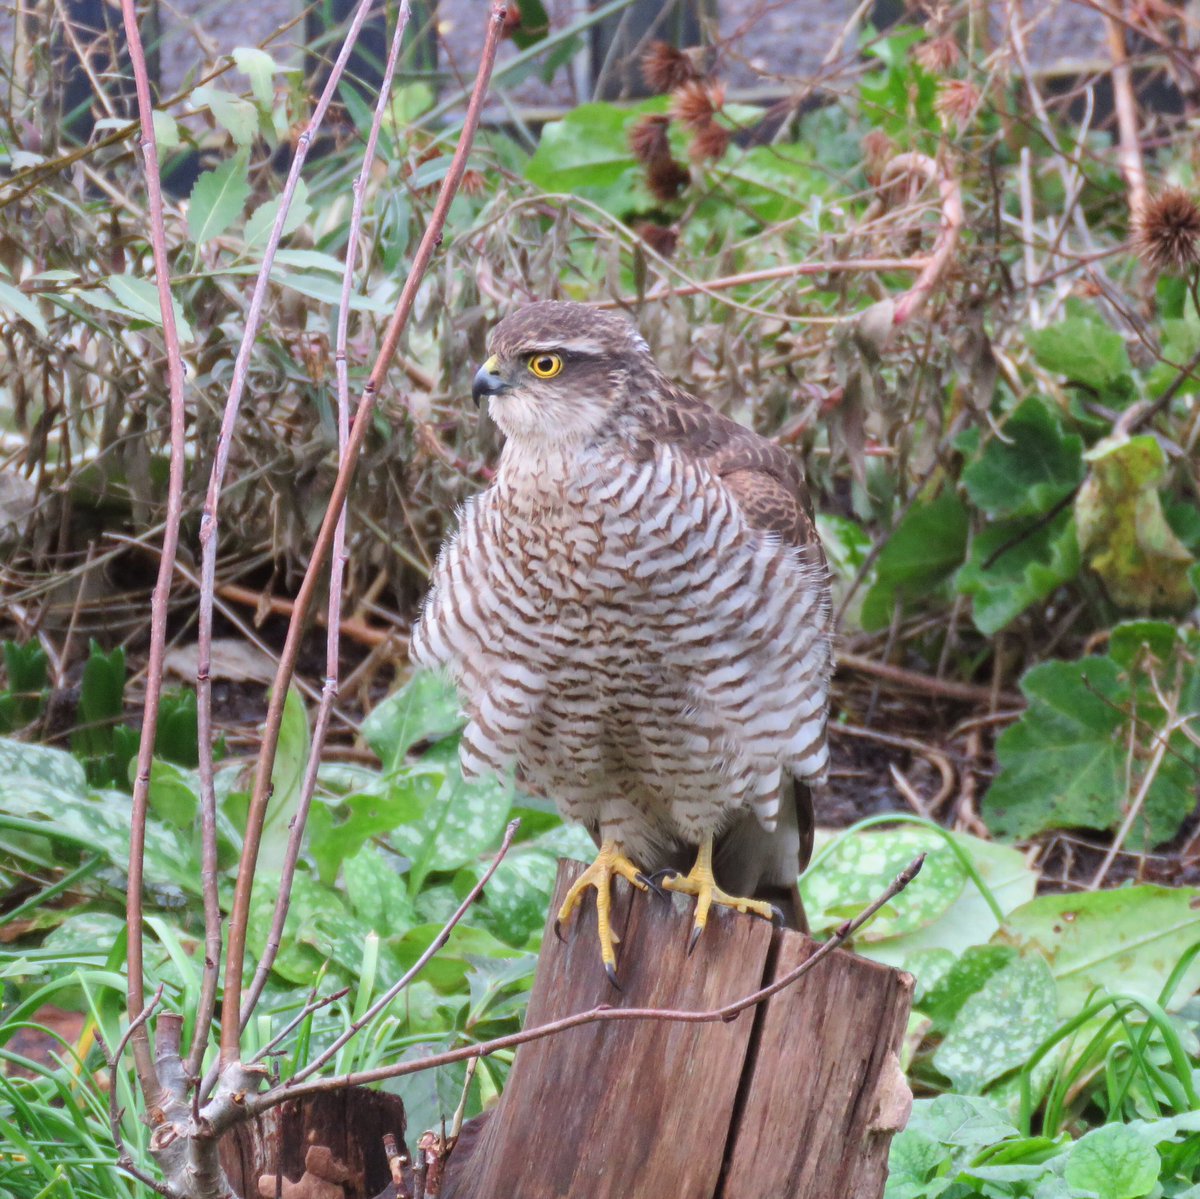 Peeking out the window counting feathered friends #BigGardenBirdWatch Sparrow hawk looks perplexed, poss thinking “some folk must hate nature from grubbing out healthy hedgerow for ugly useless fence panels” You can have boundaries as made a picket fence, nature’s welcome here